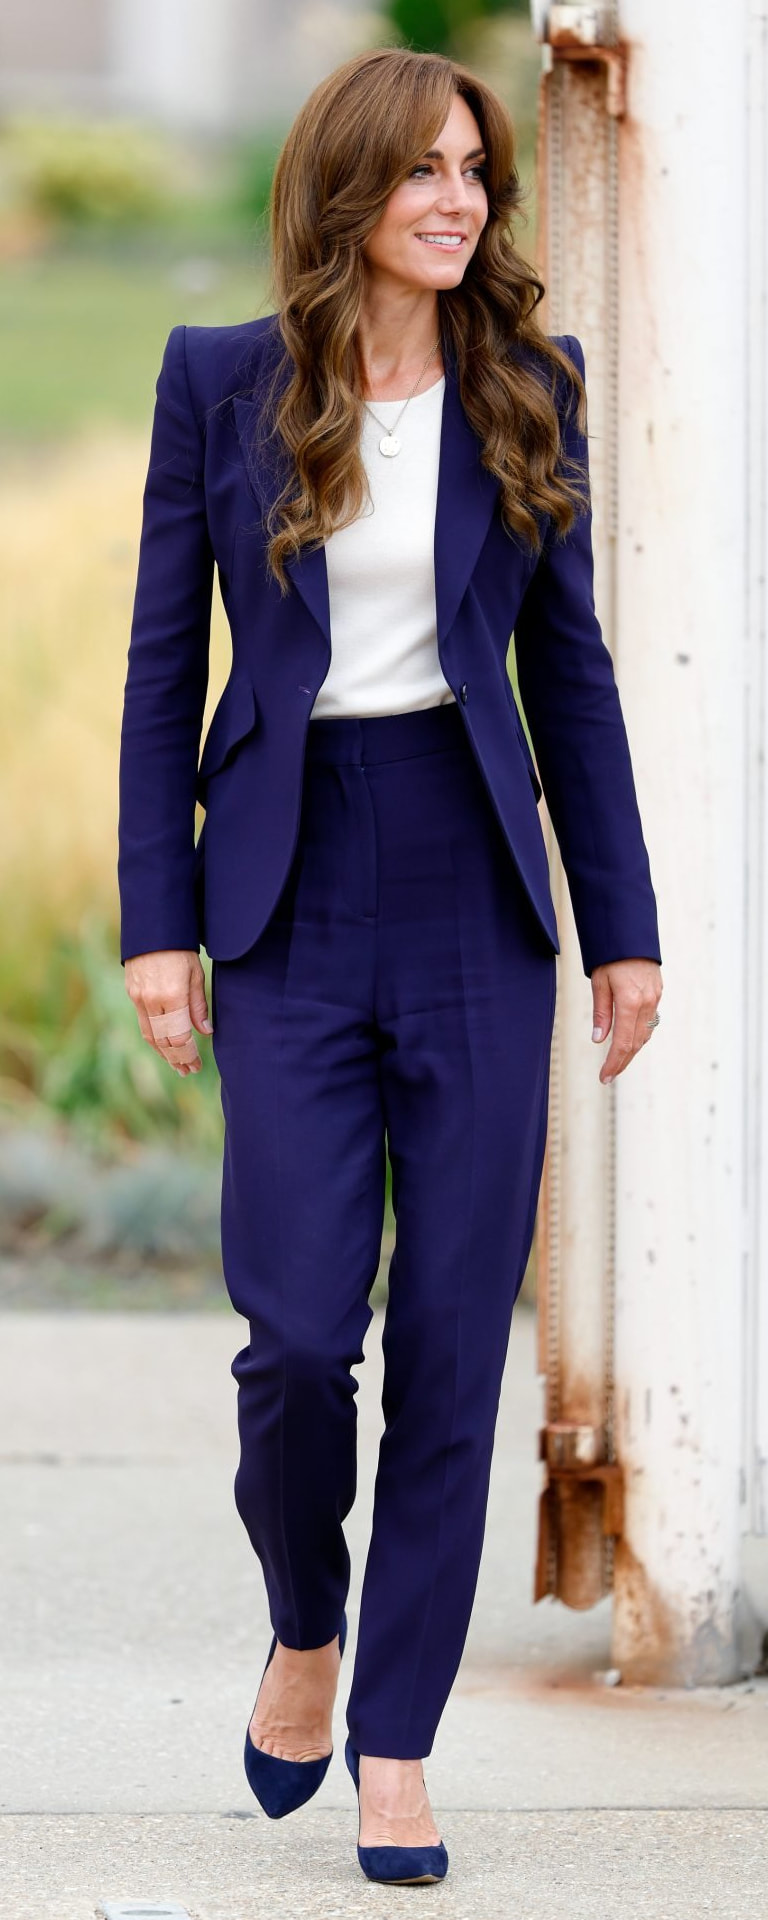 Alexander McQueen Tailored Cigarette Trousers in Amethyst - Kate ...